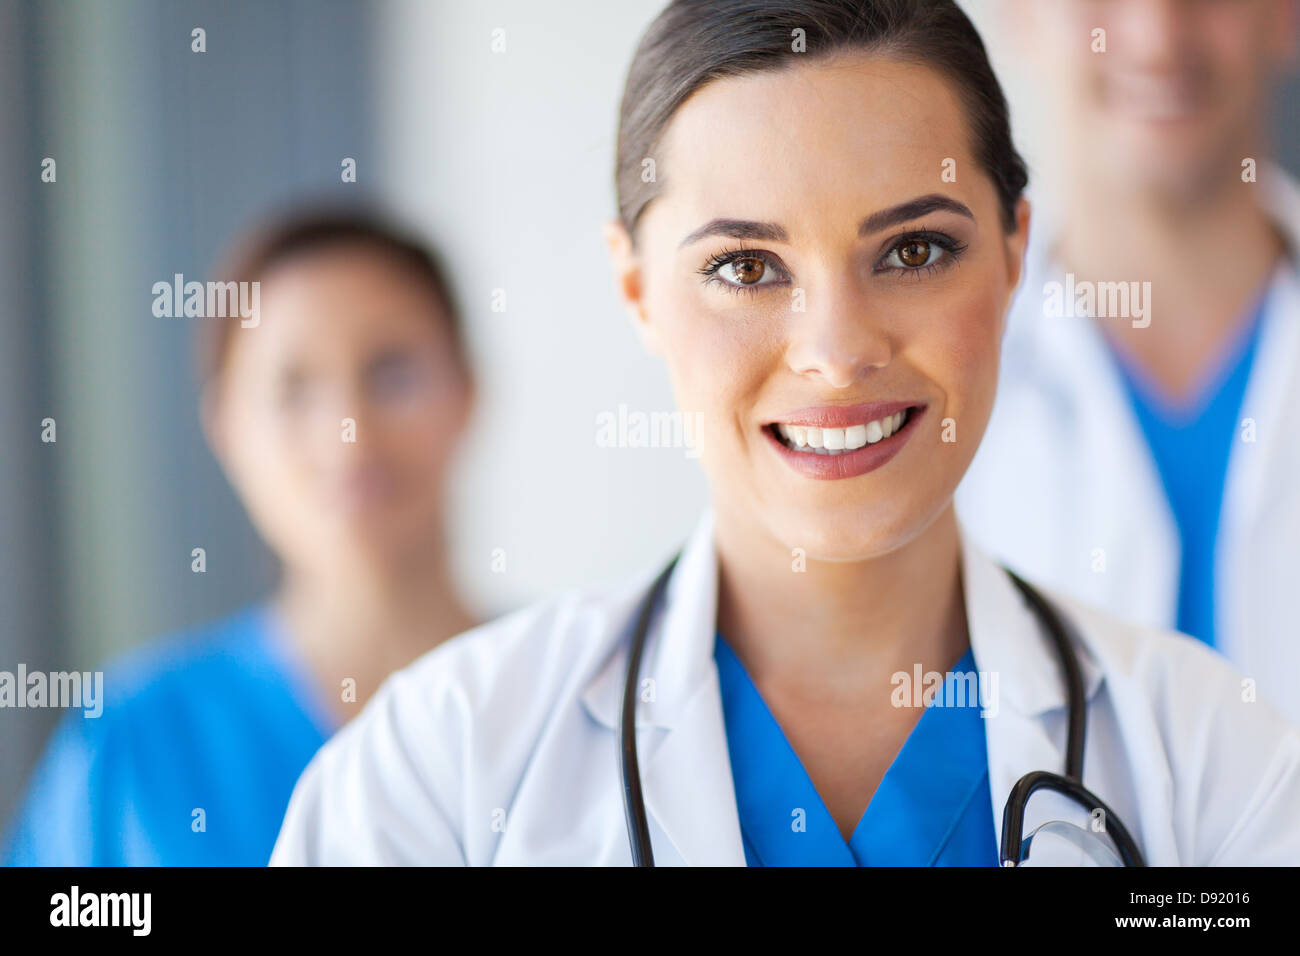 group of medical workers Stock Photo